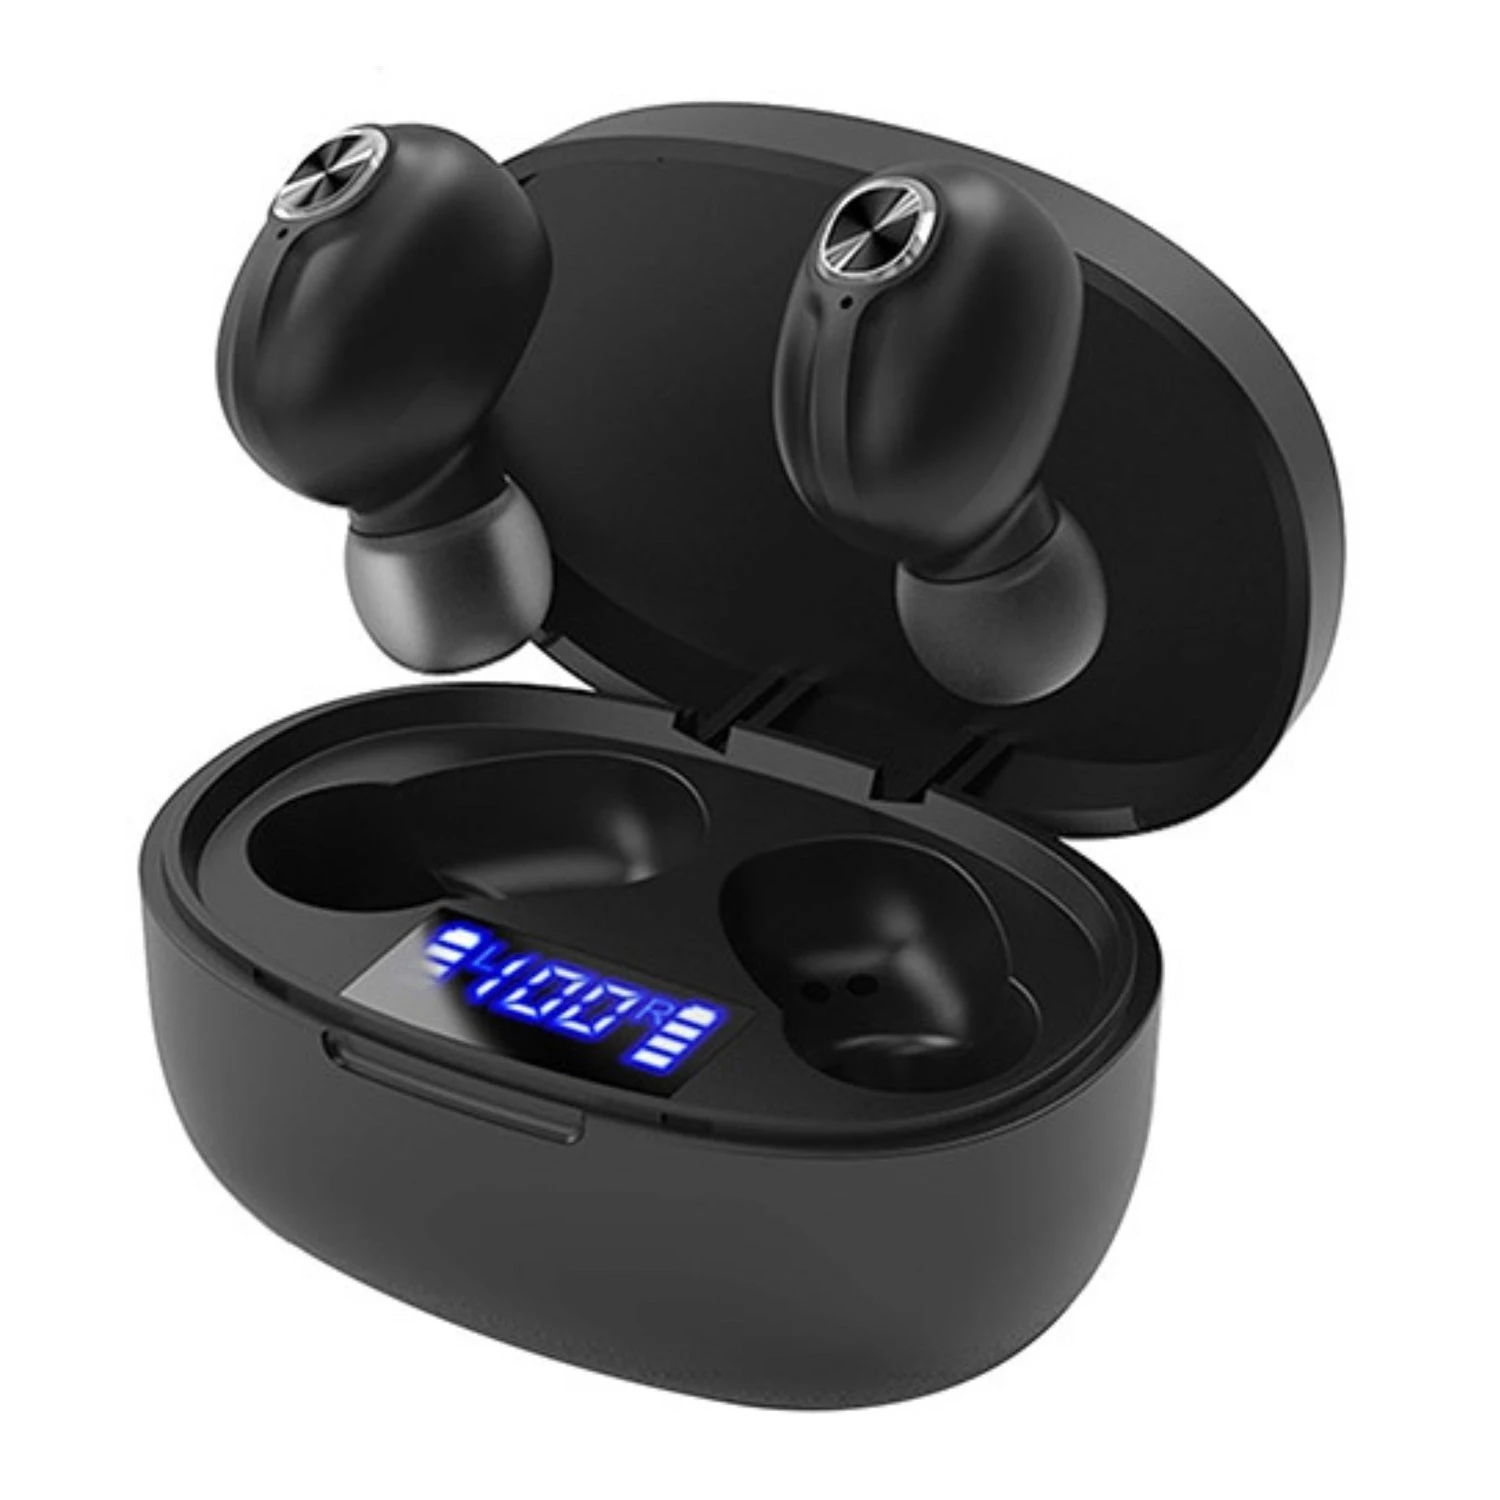 TWS Wireless 5.0 Earbuds - In-Ear Stereo Headset with Noise Canceling, Mic